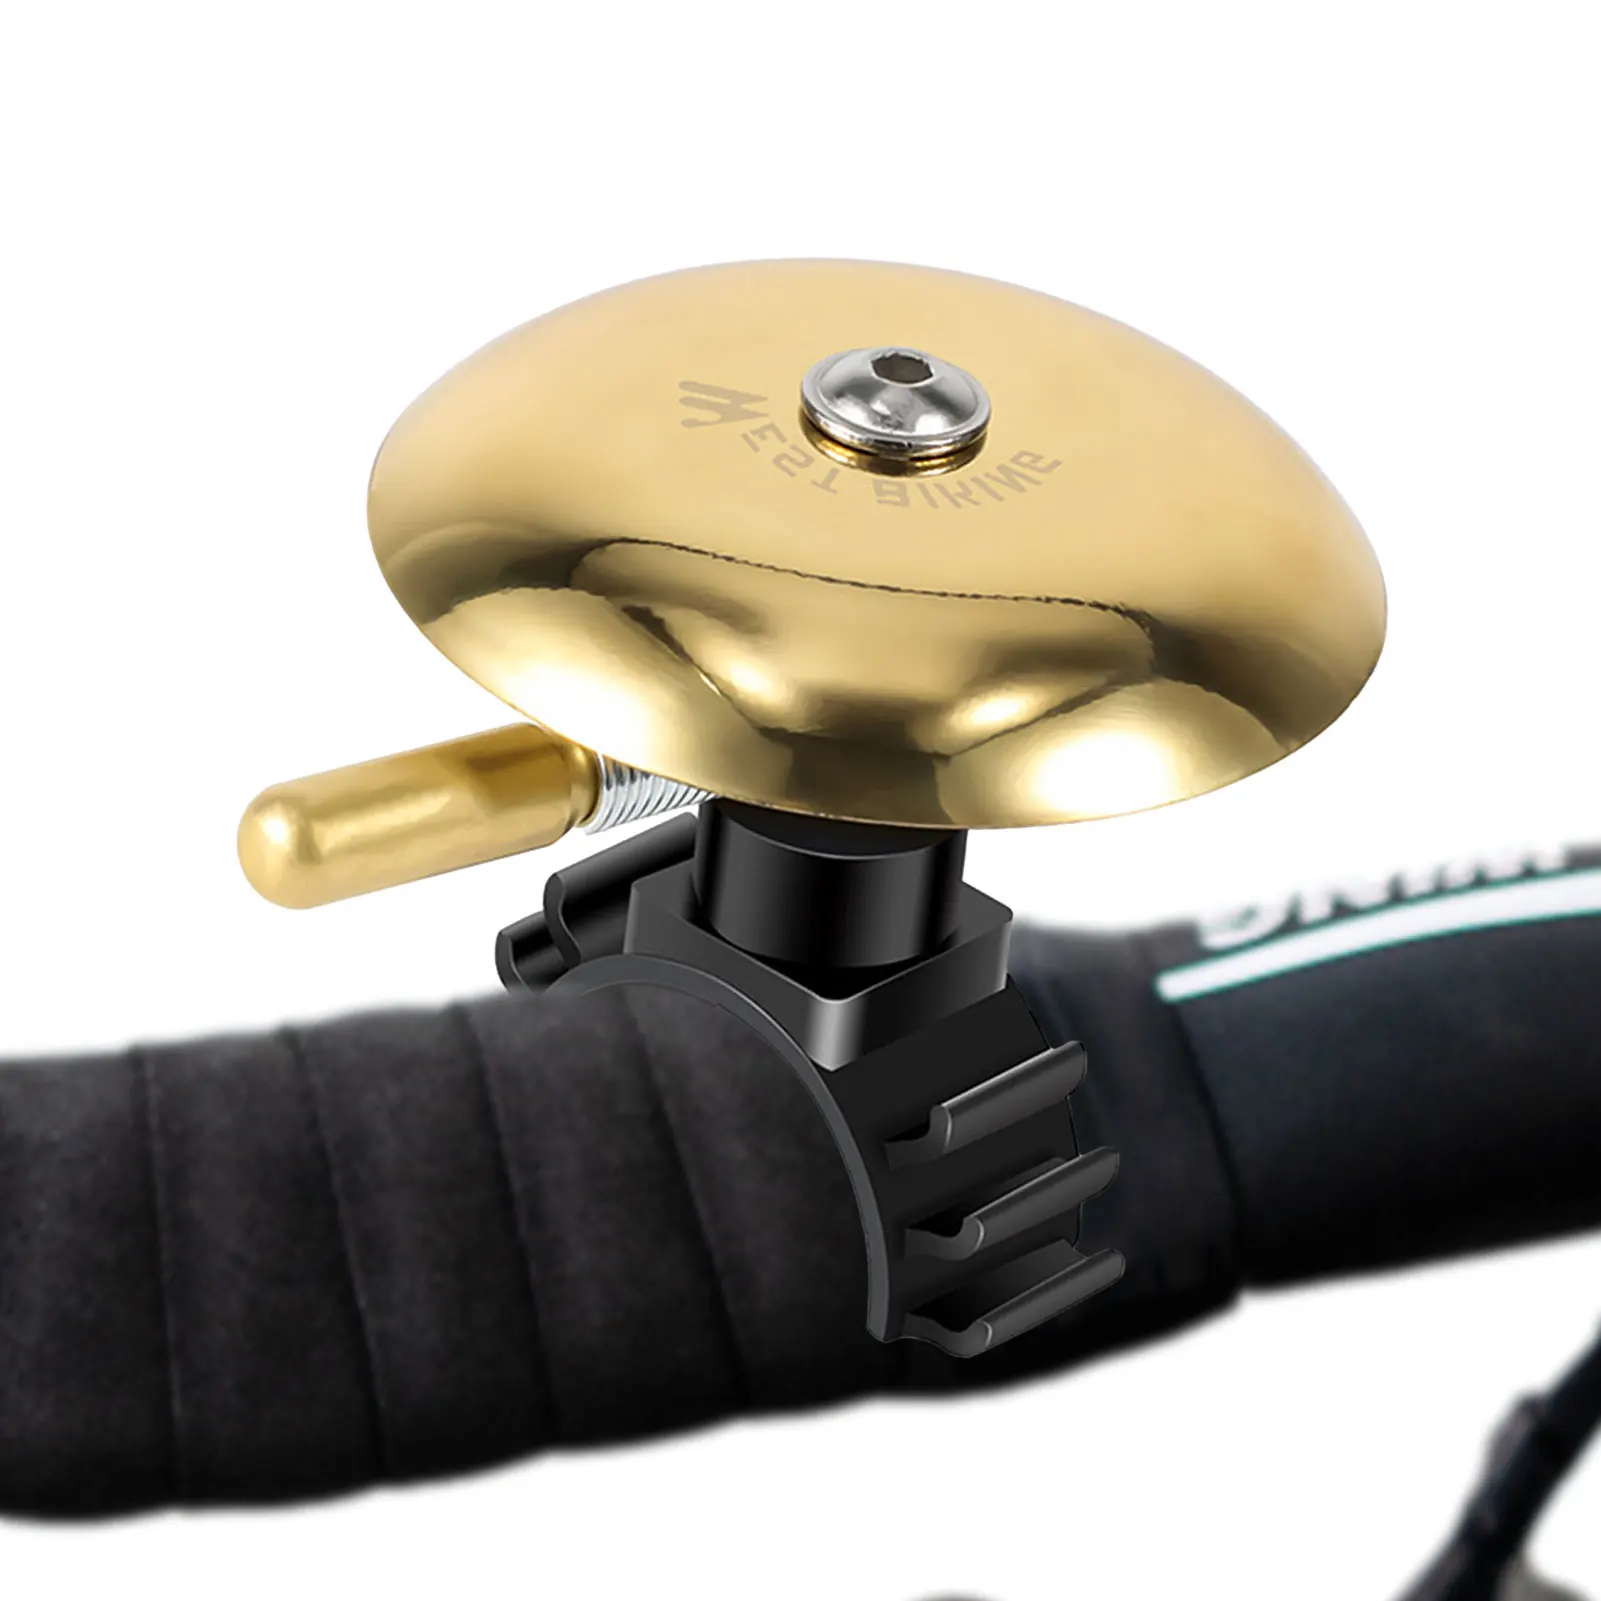 

Brass Bicycle Bell Classic Bike Bell With Loud Crisp Clear Sound Bicycle Bells Accessories For Adults Youths Stylish Bike Horn